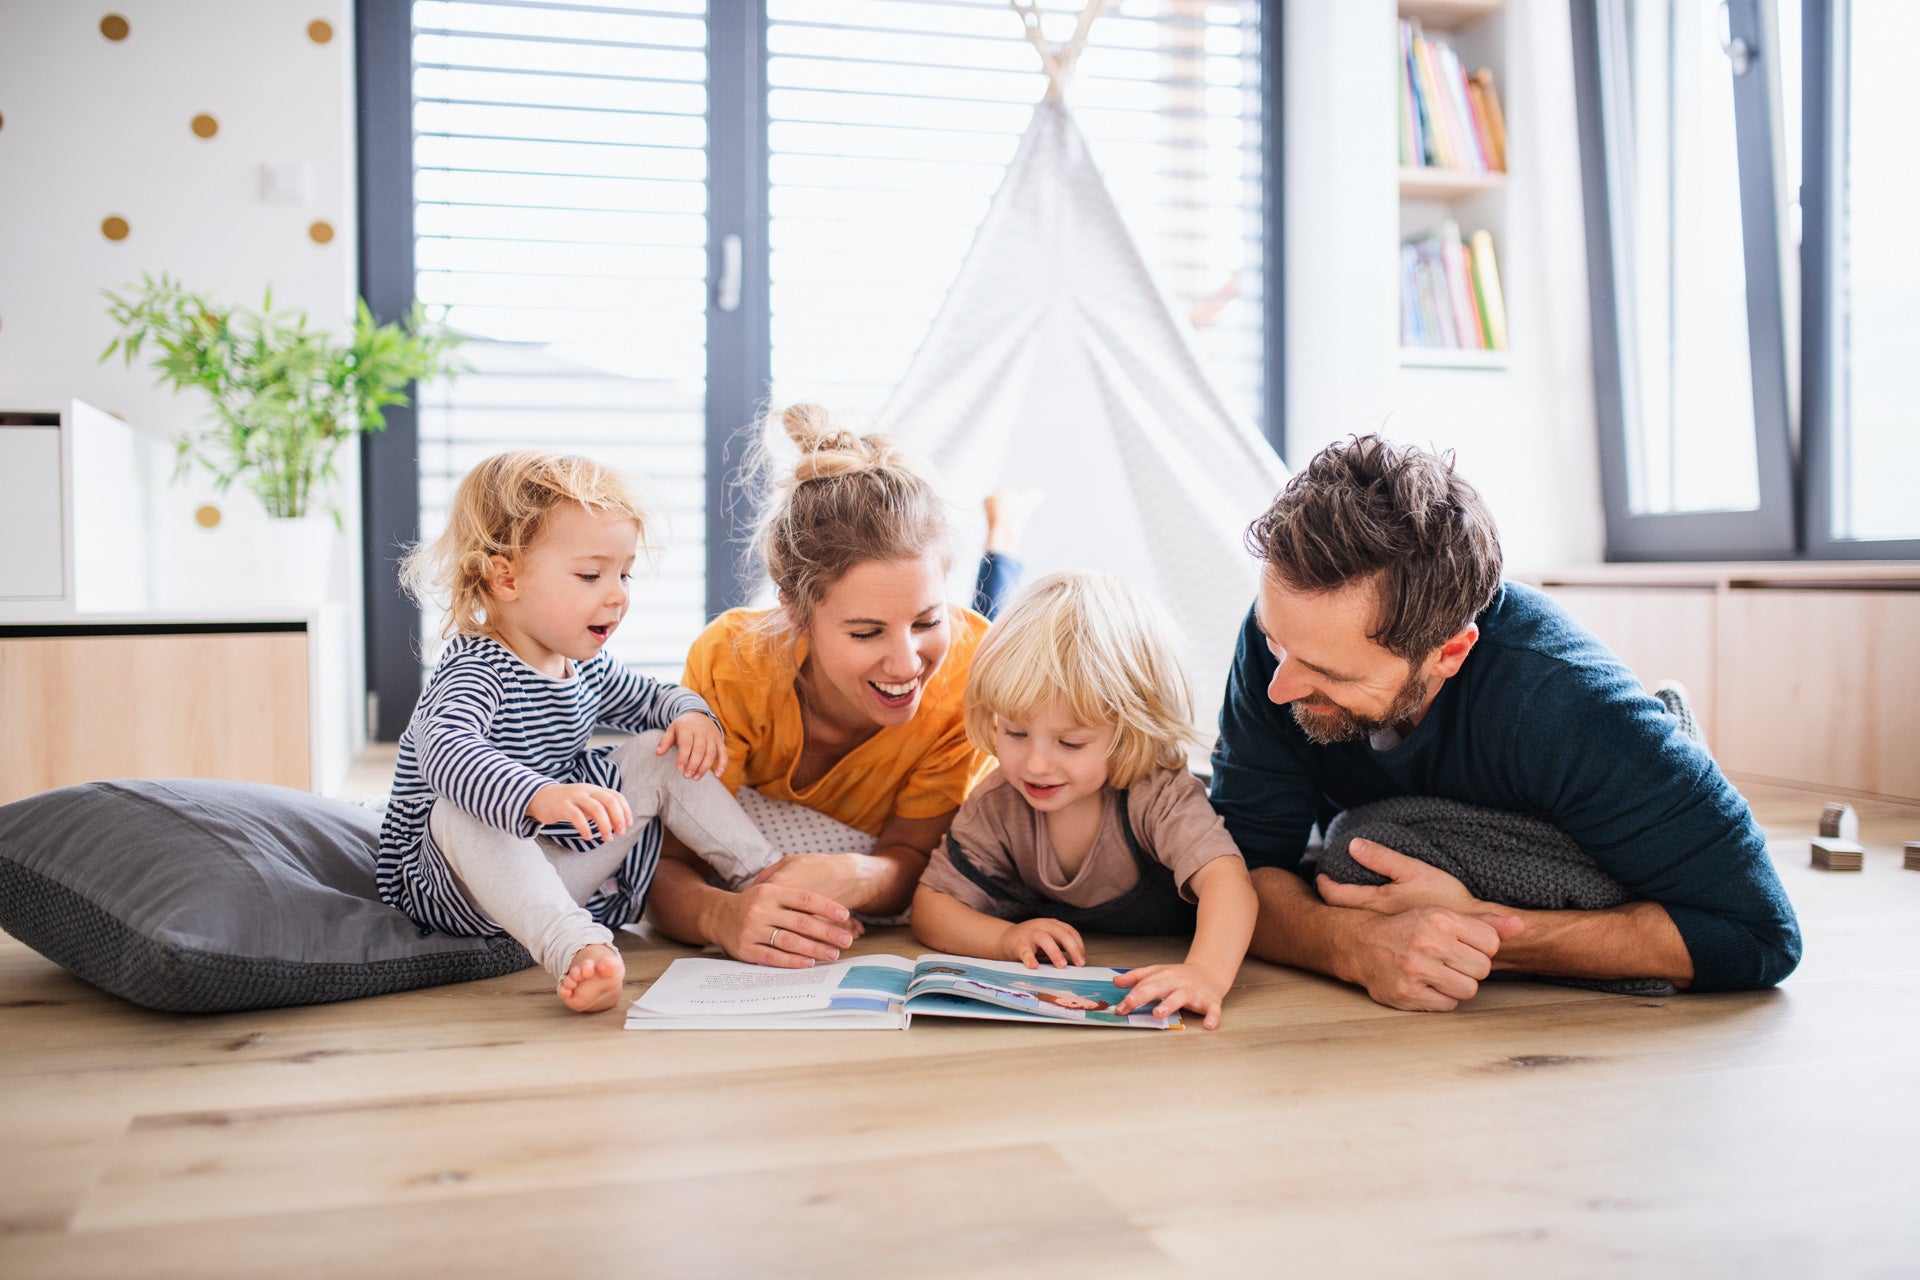 Family with young children reading book on floor of living room